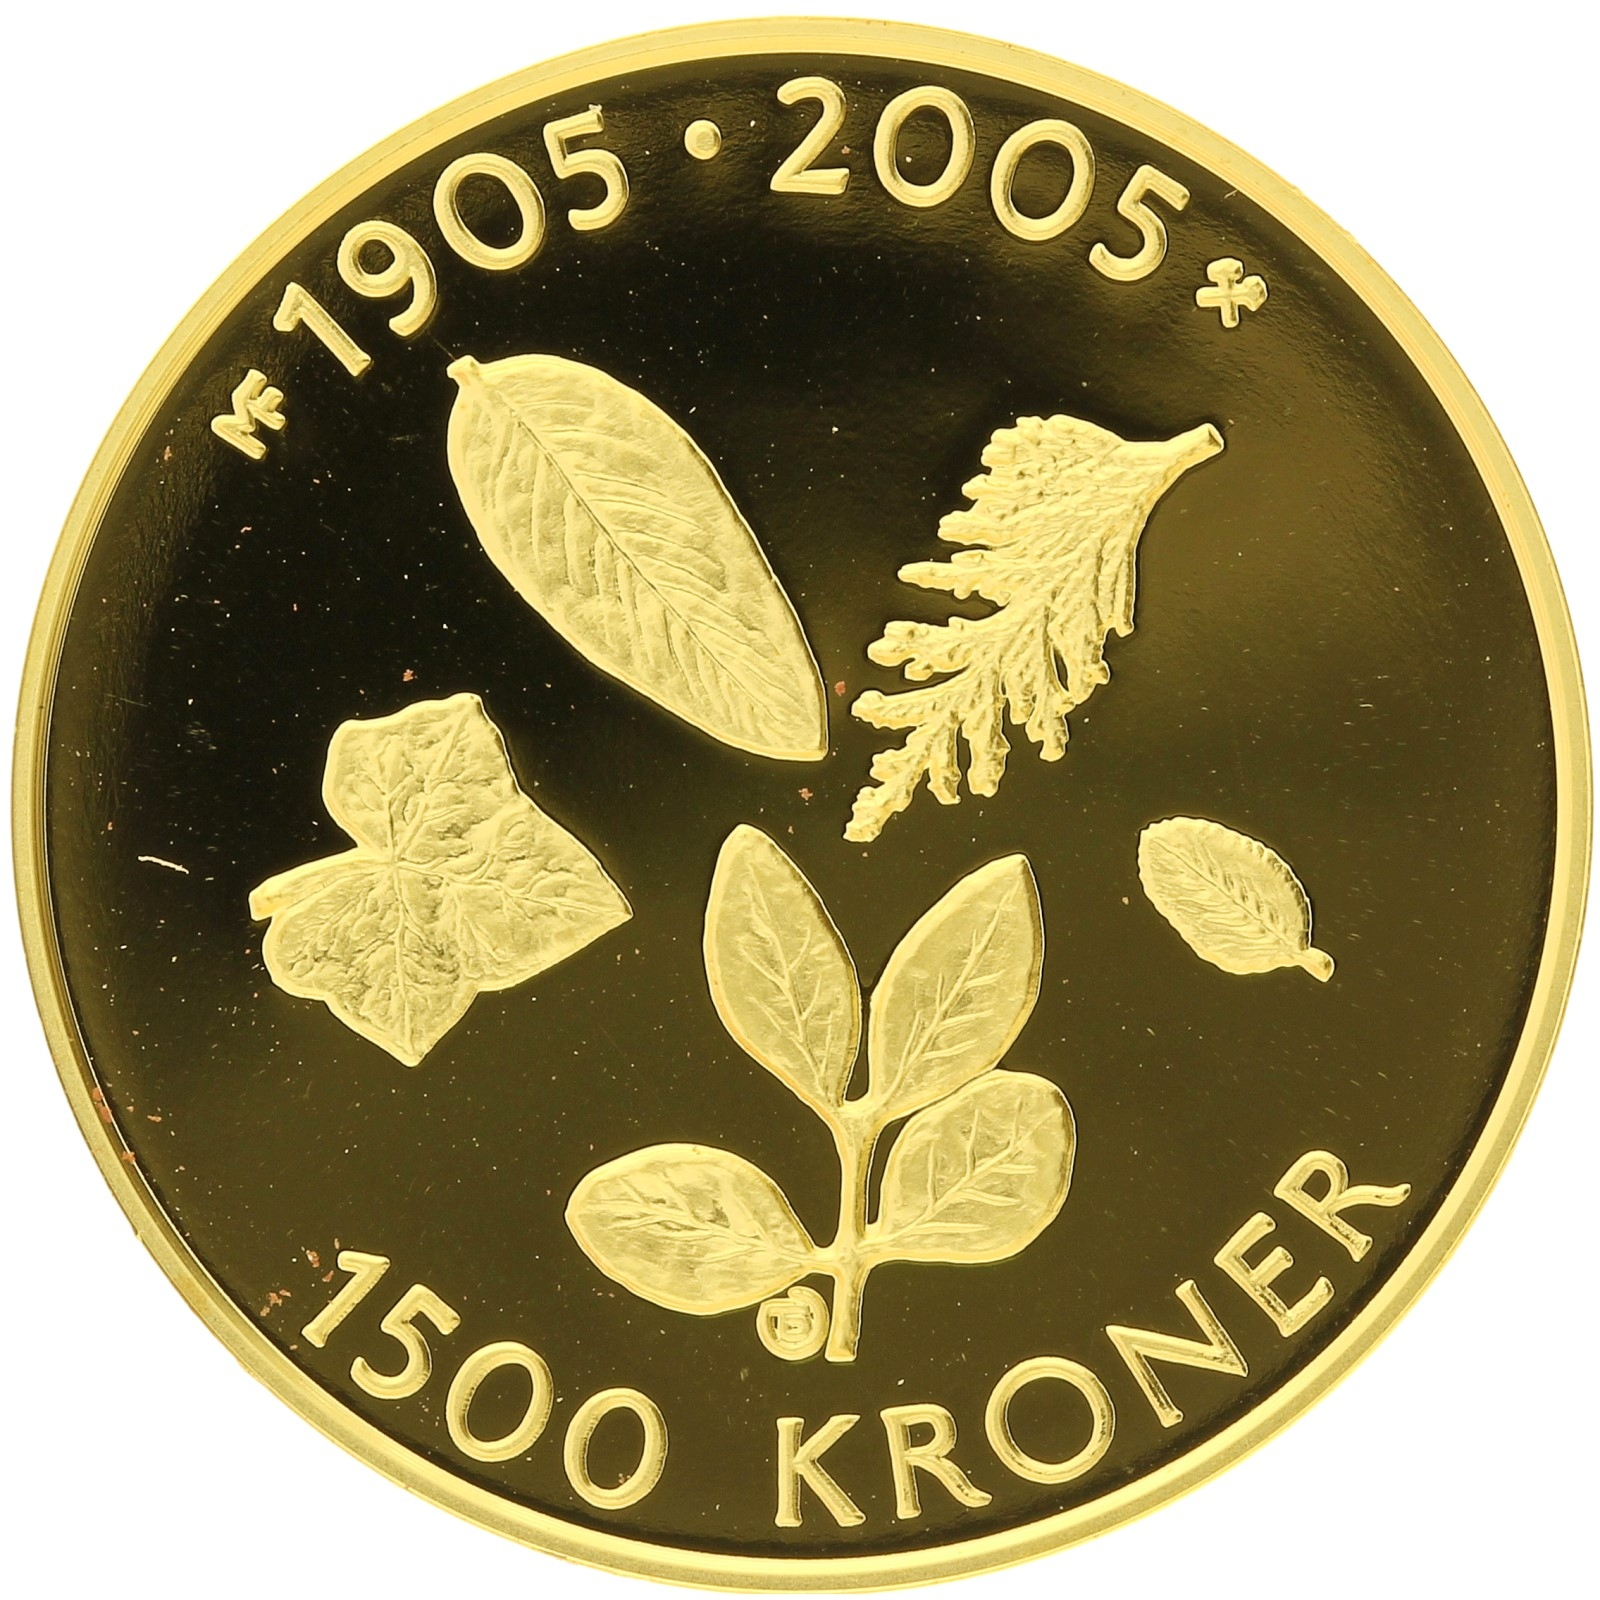 Norway - 1500 Kroner - 2003 - Harald V Dissolution of the Union - 1/2oz